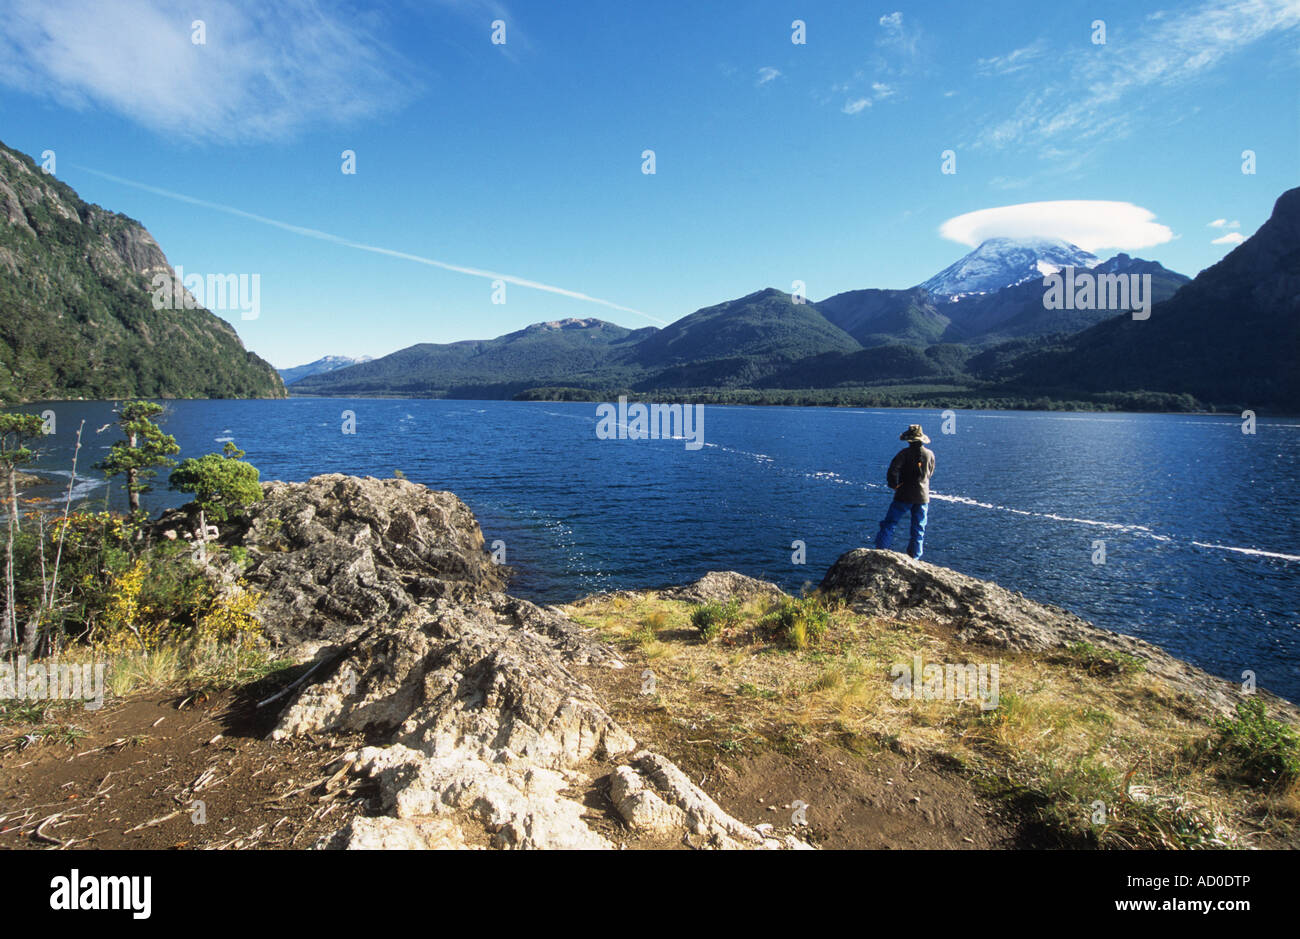 Trekker looking at view over Lake Paimun to Lanin volcano, Lanin National Park, Neuquen Province, Argentina Stock Photo